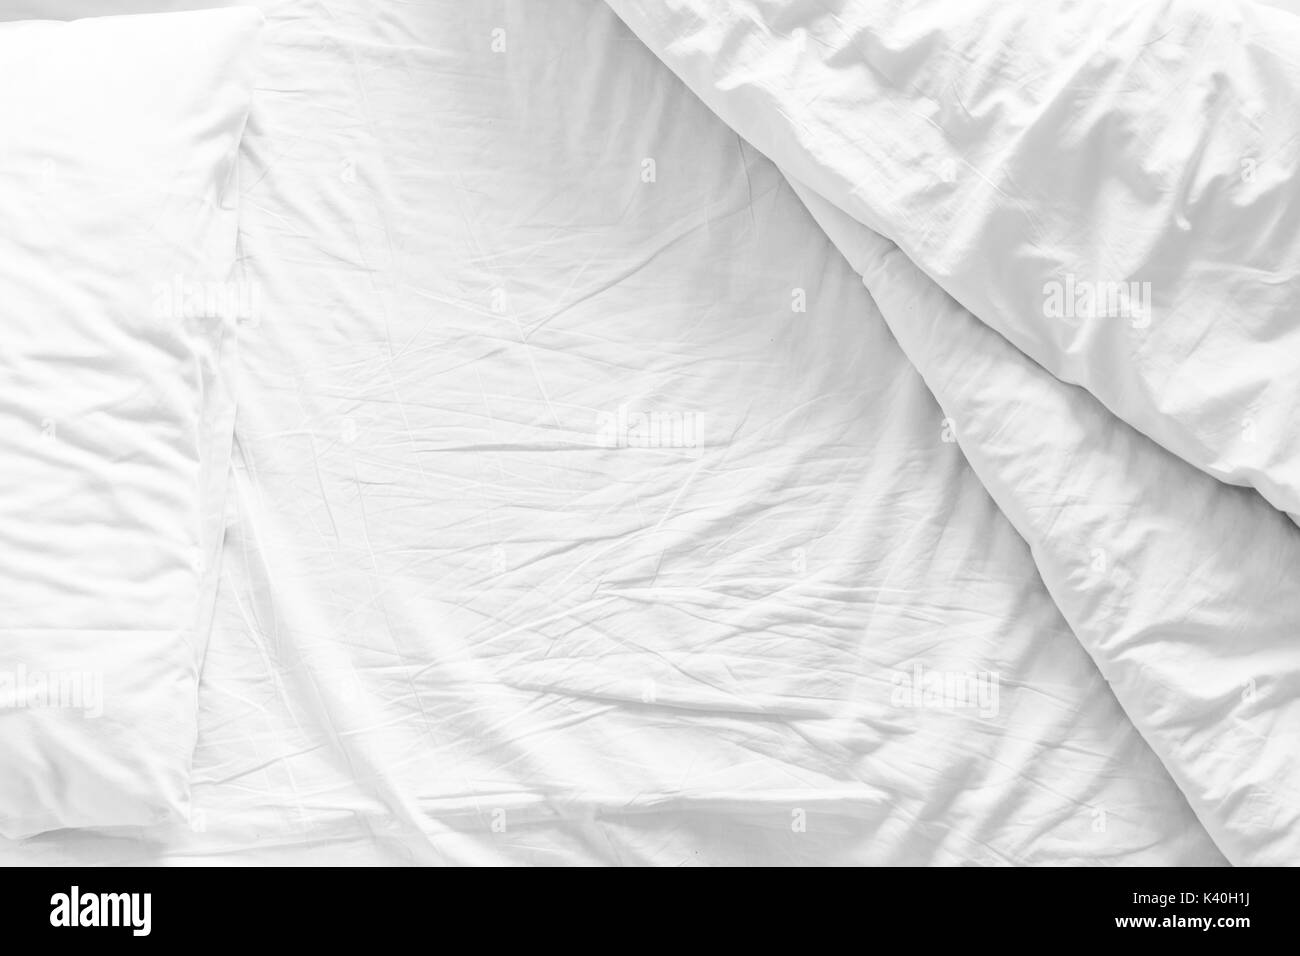 unmade bed with crumpled bed sheet, a blanket and pillows after comfort duvet sleep waking up in the morning Stock Photo